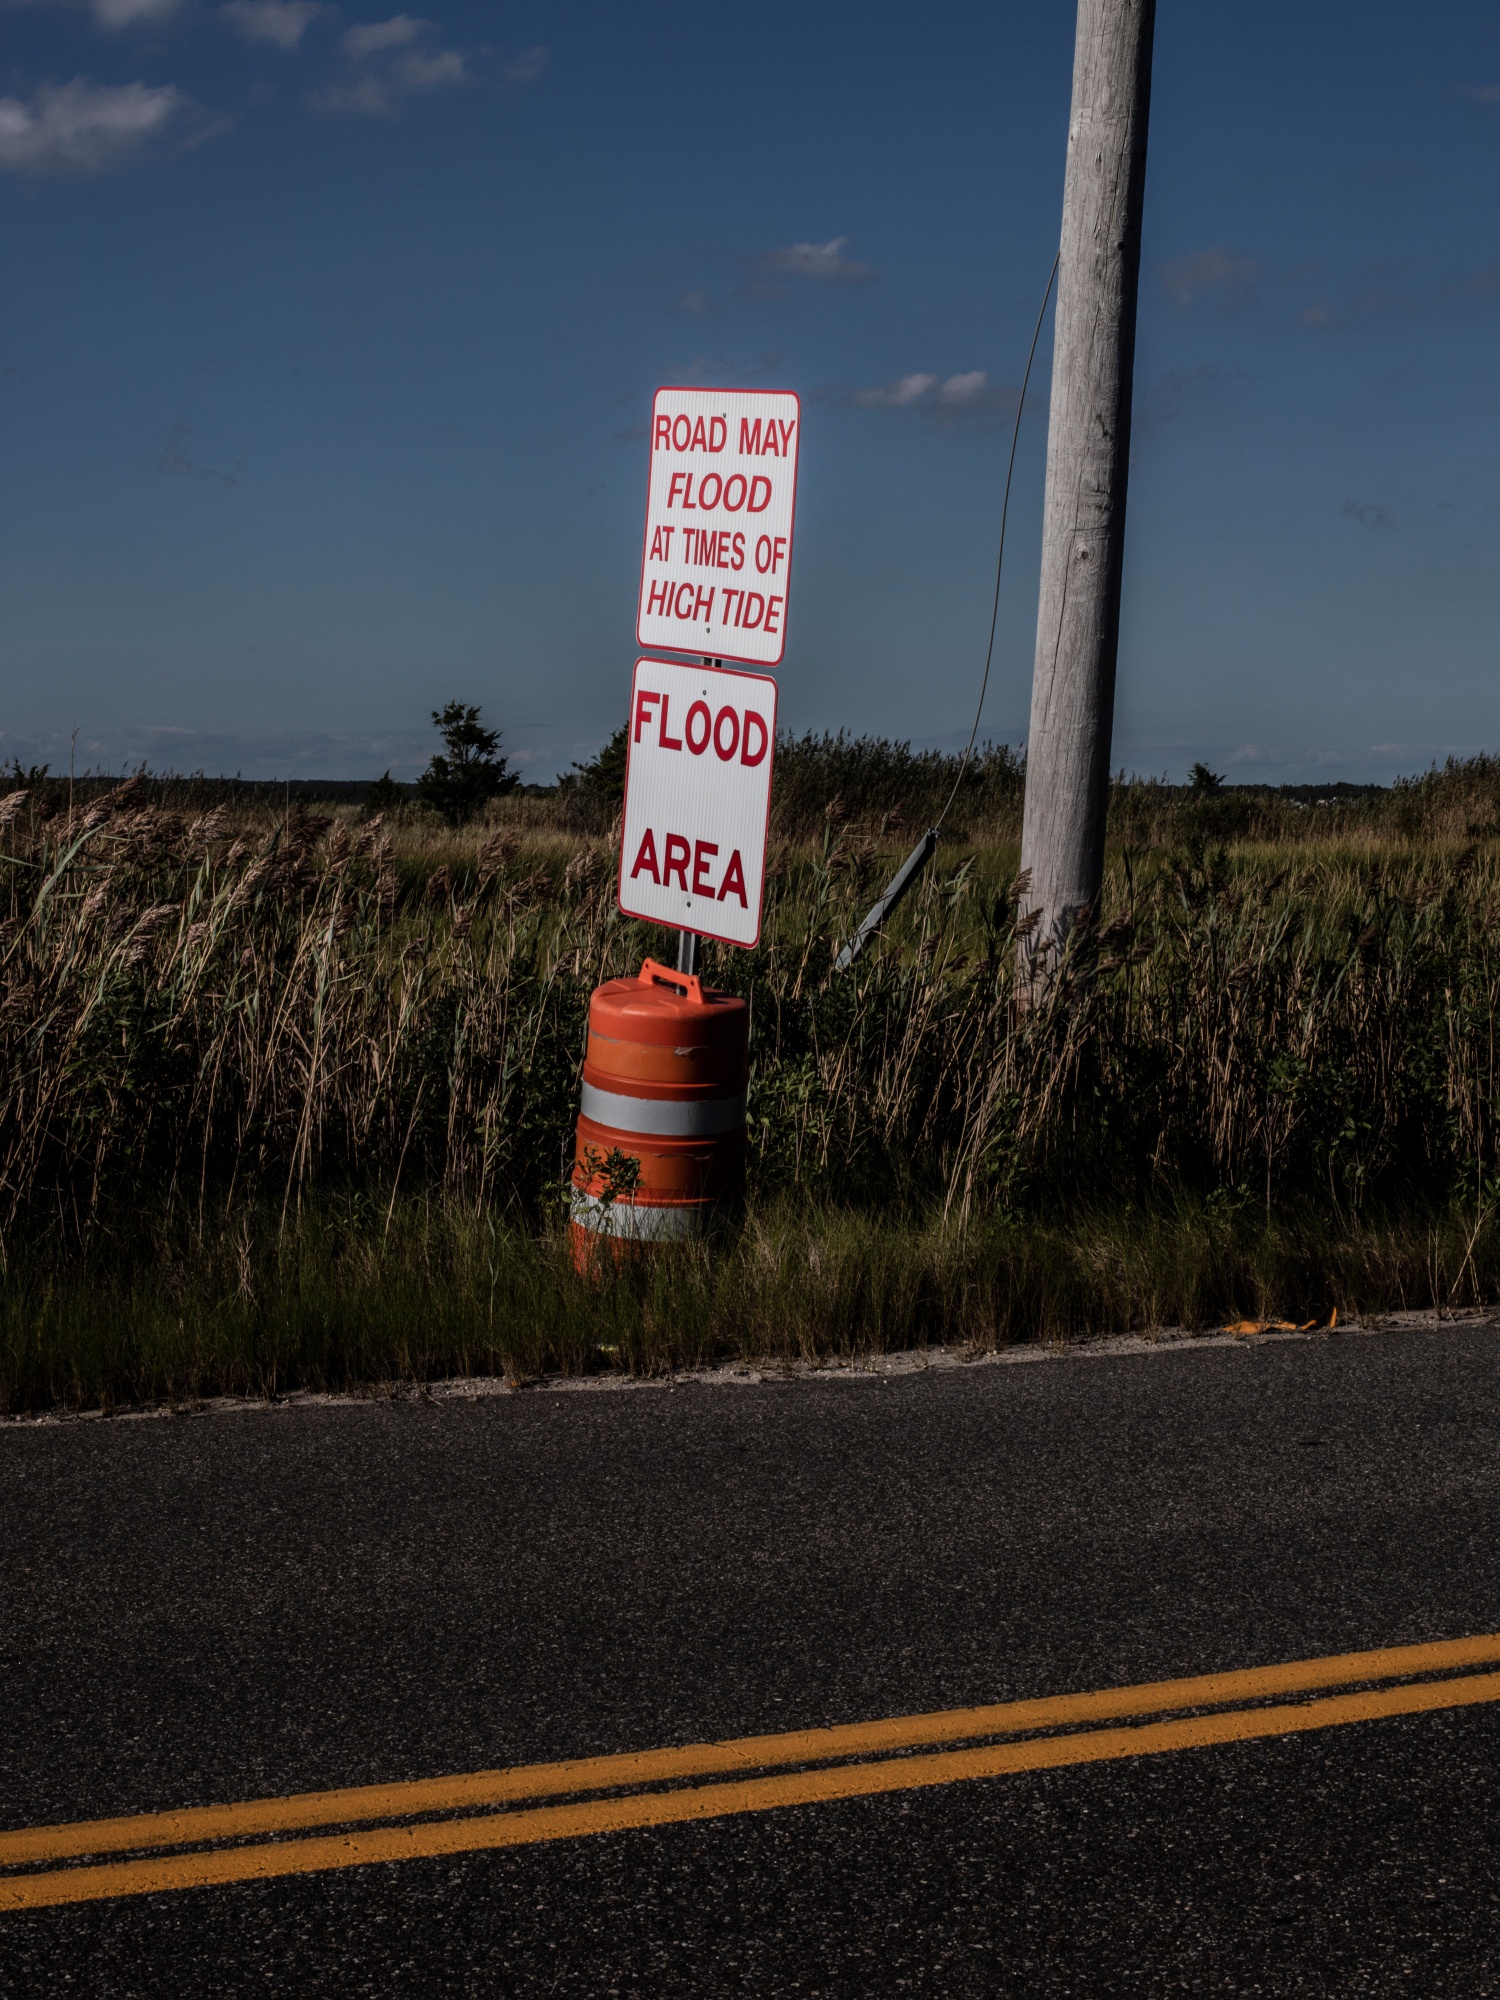 A flood area warning sign seen on Dune Road in the Hamptons.